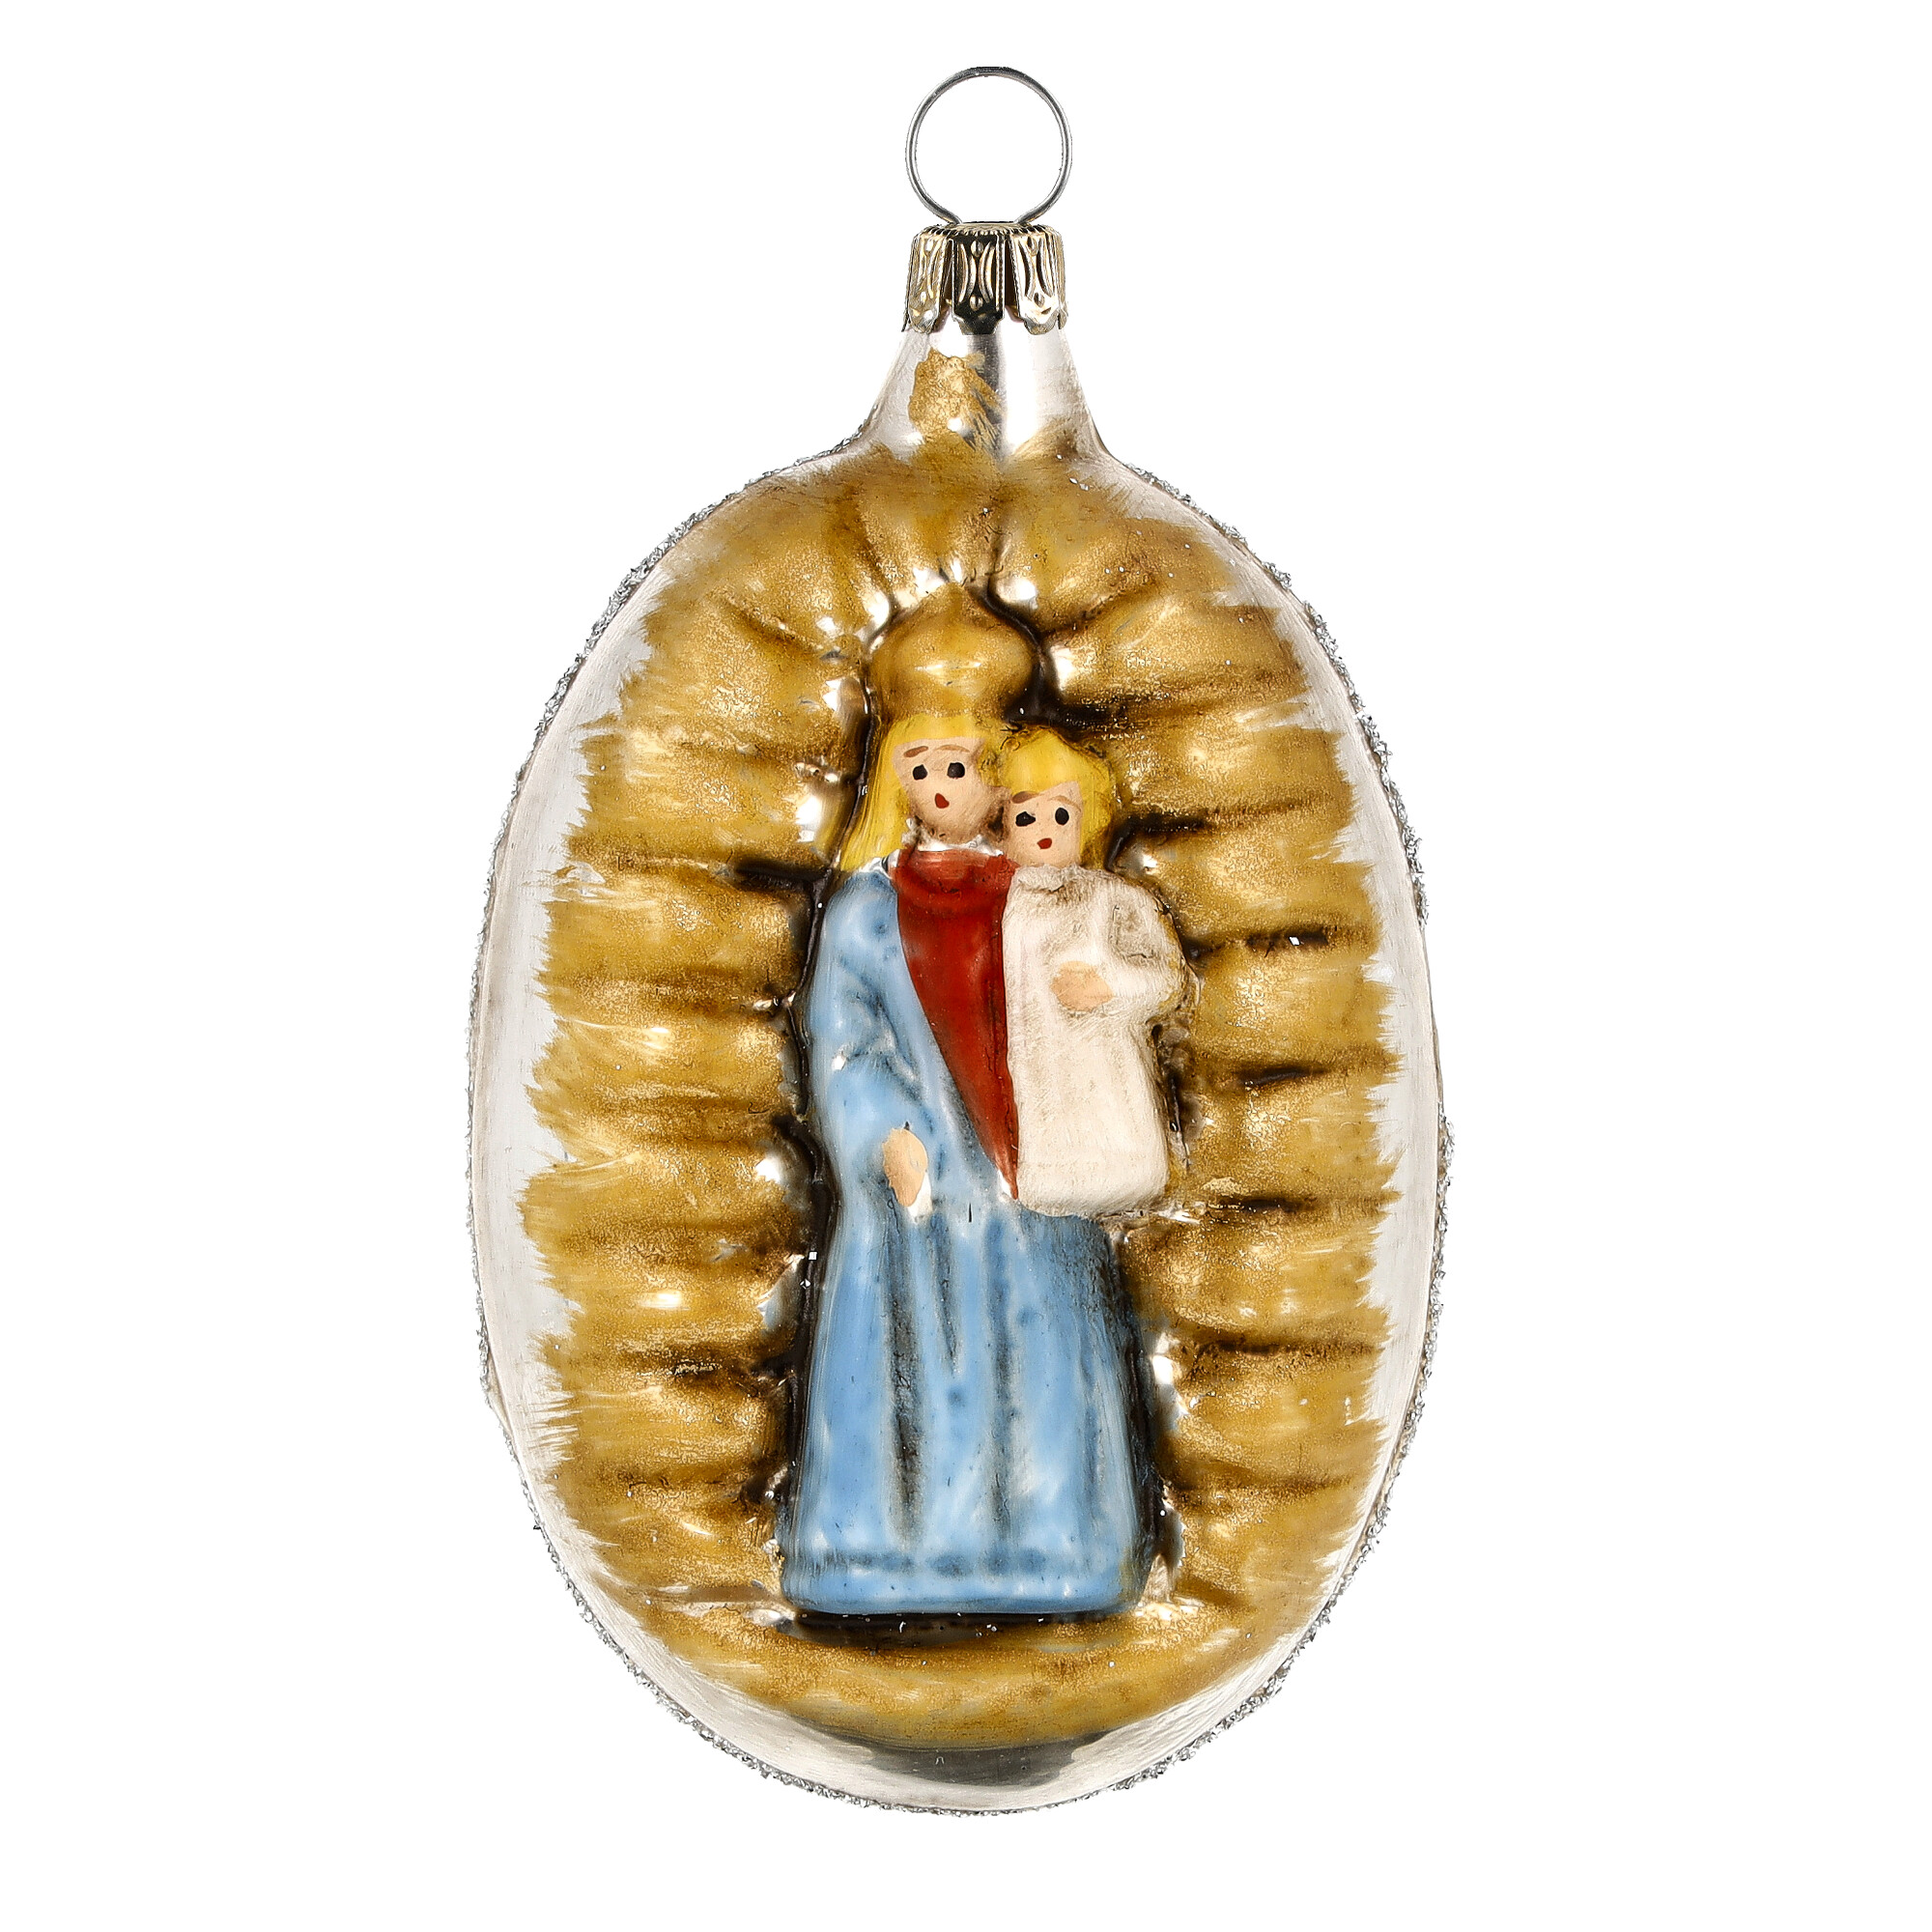 Retro Vintage style Christmas Glass Ornament - Madonna with child